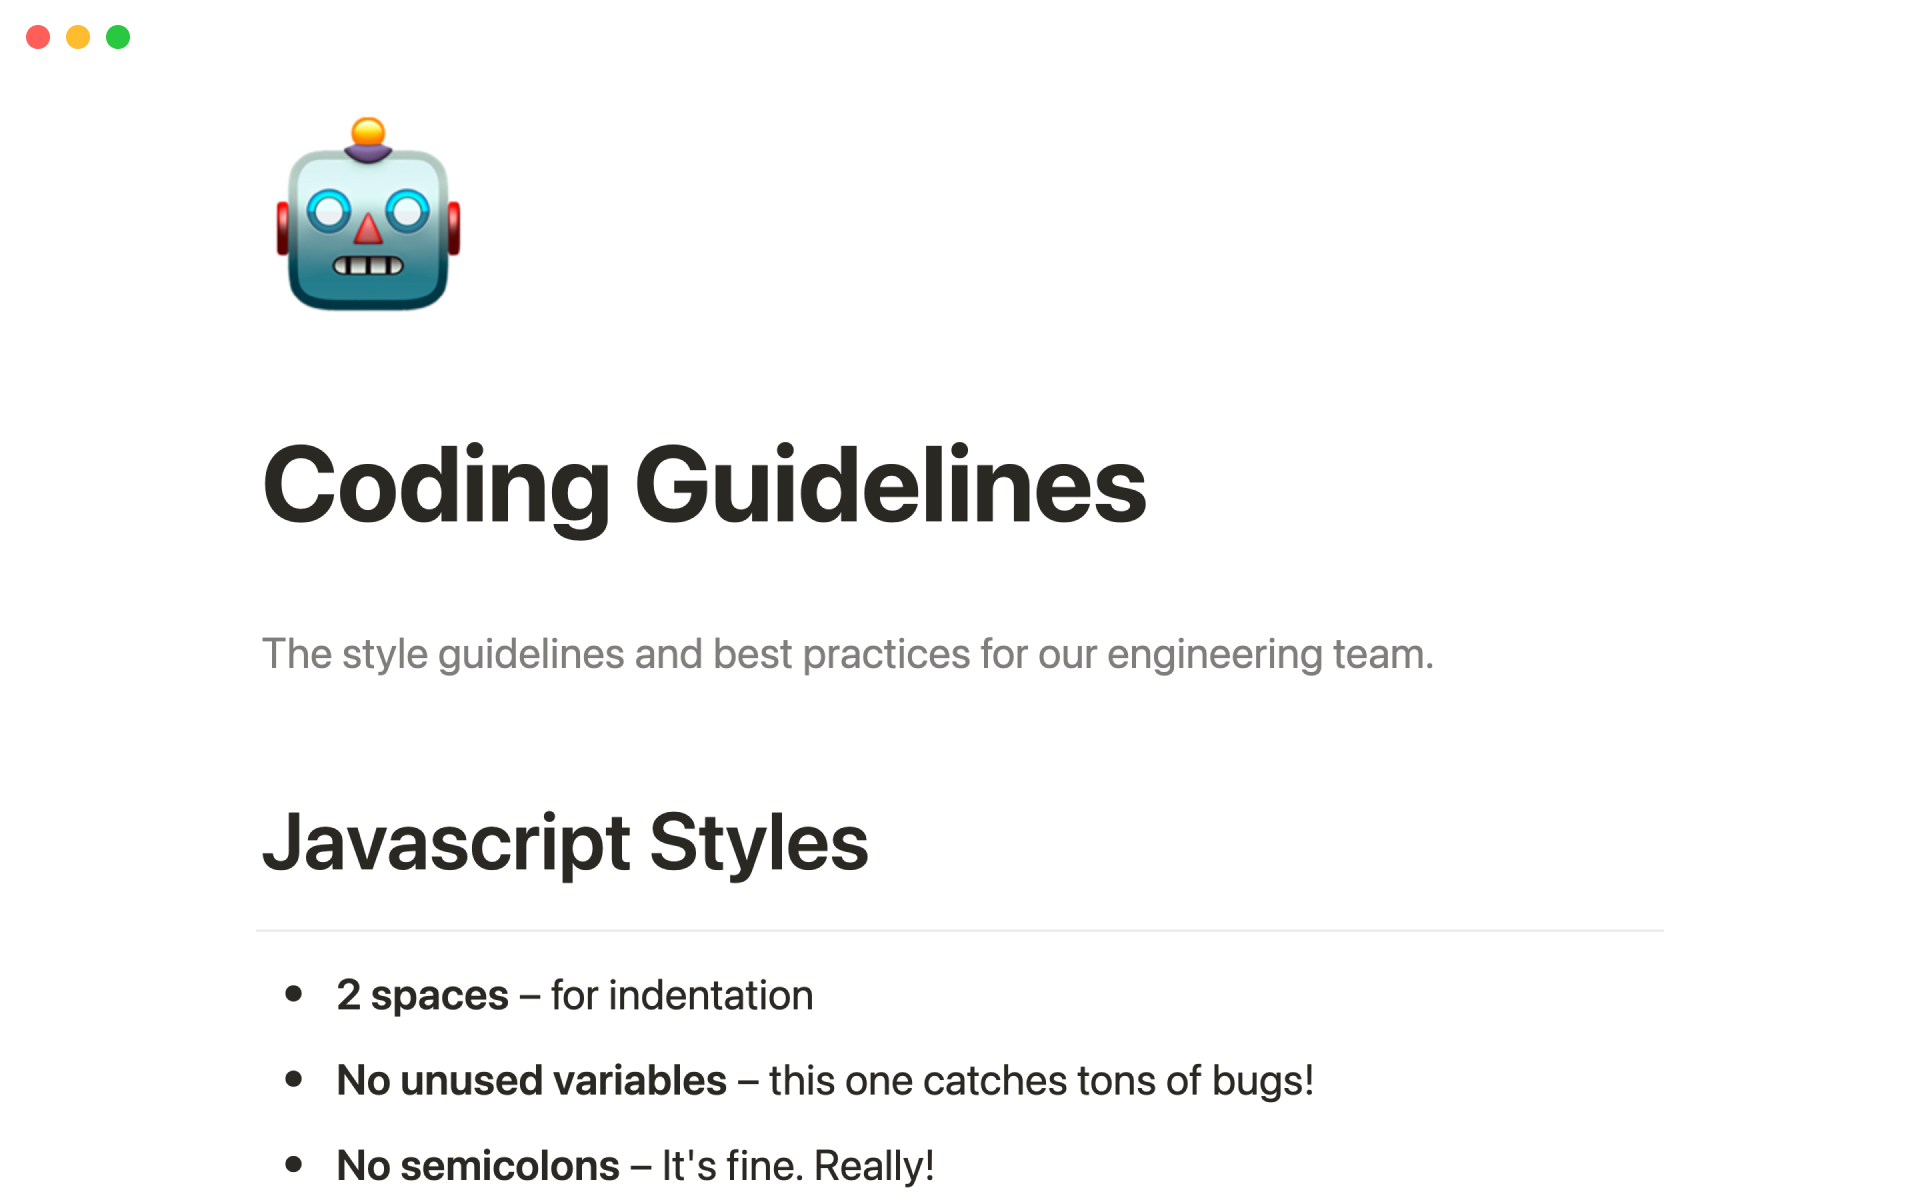 The desktop image for the Coding guidelines template